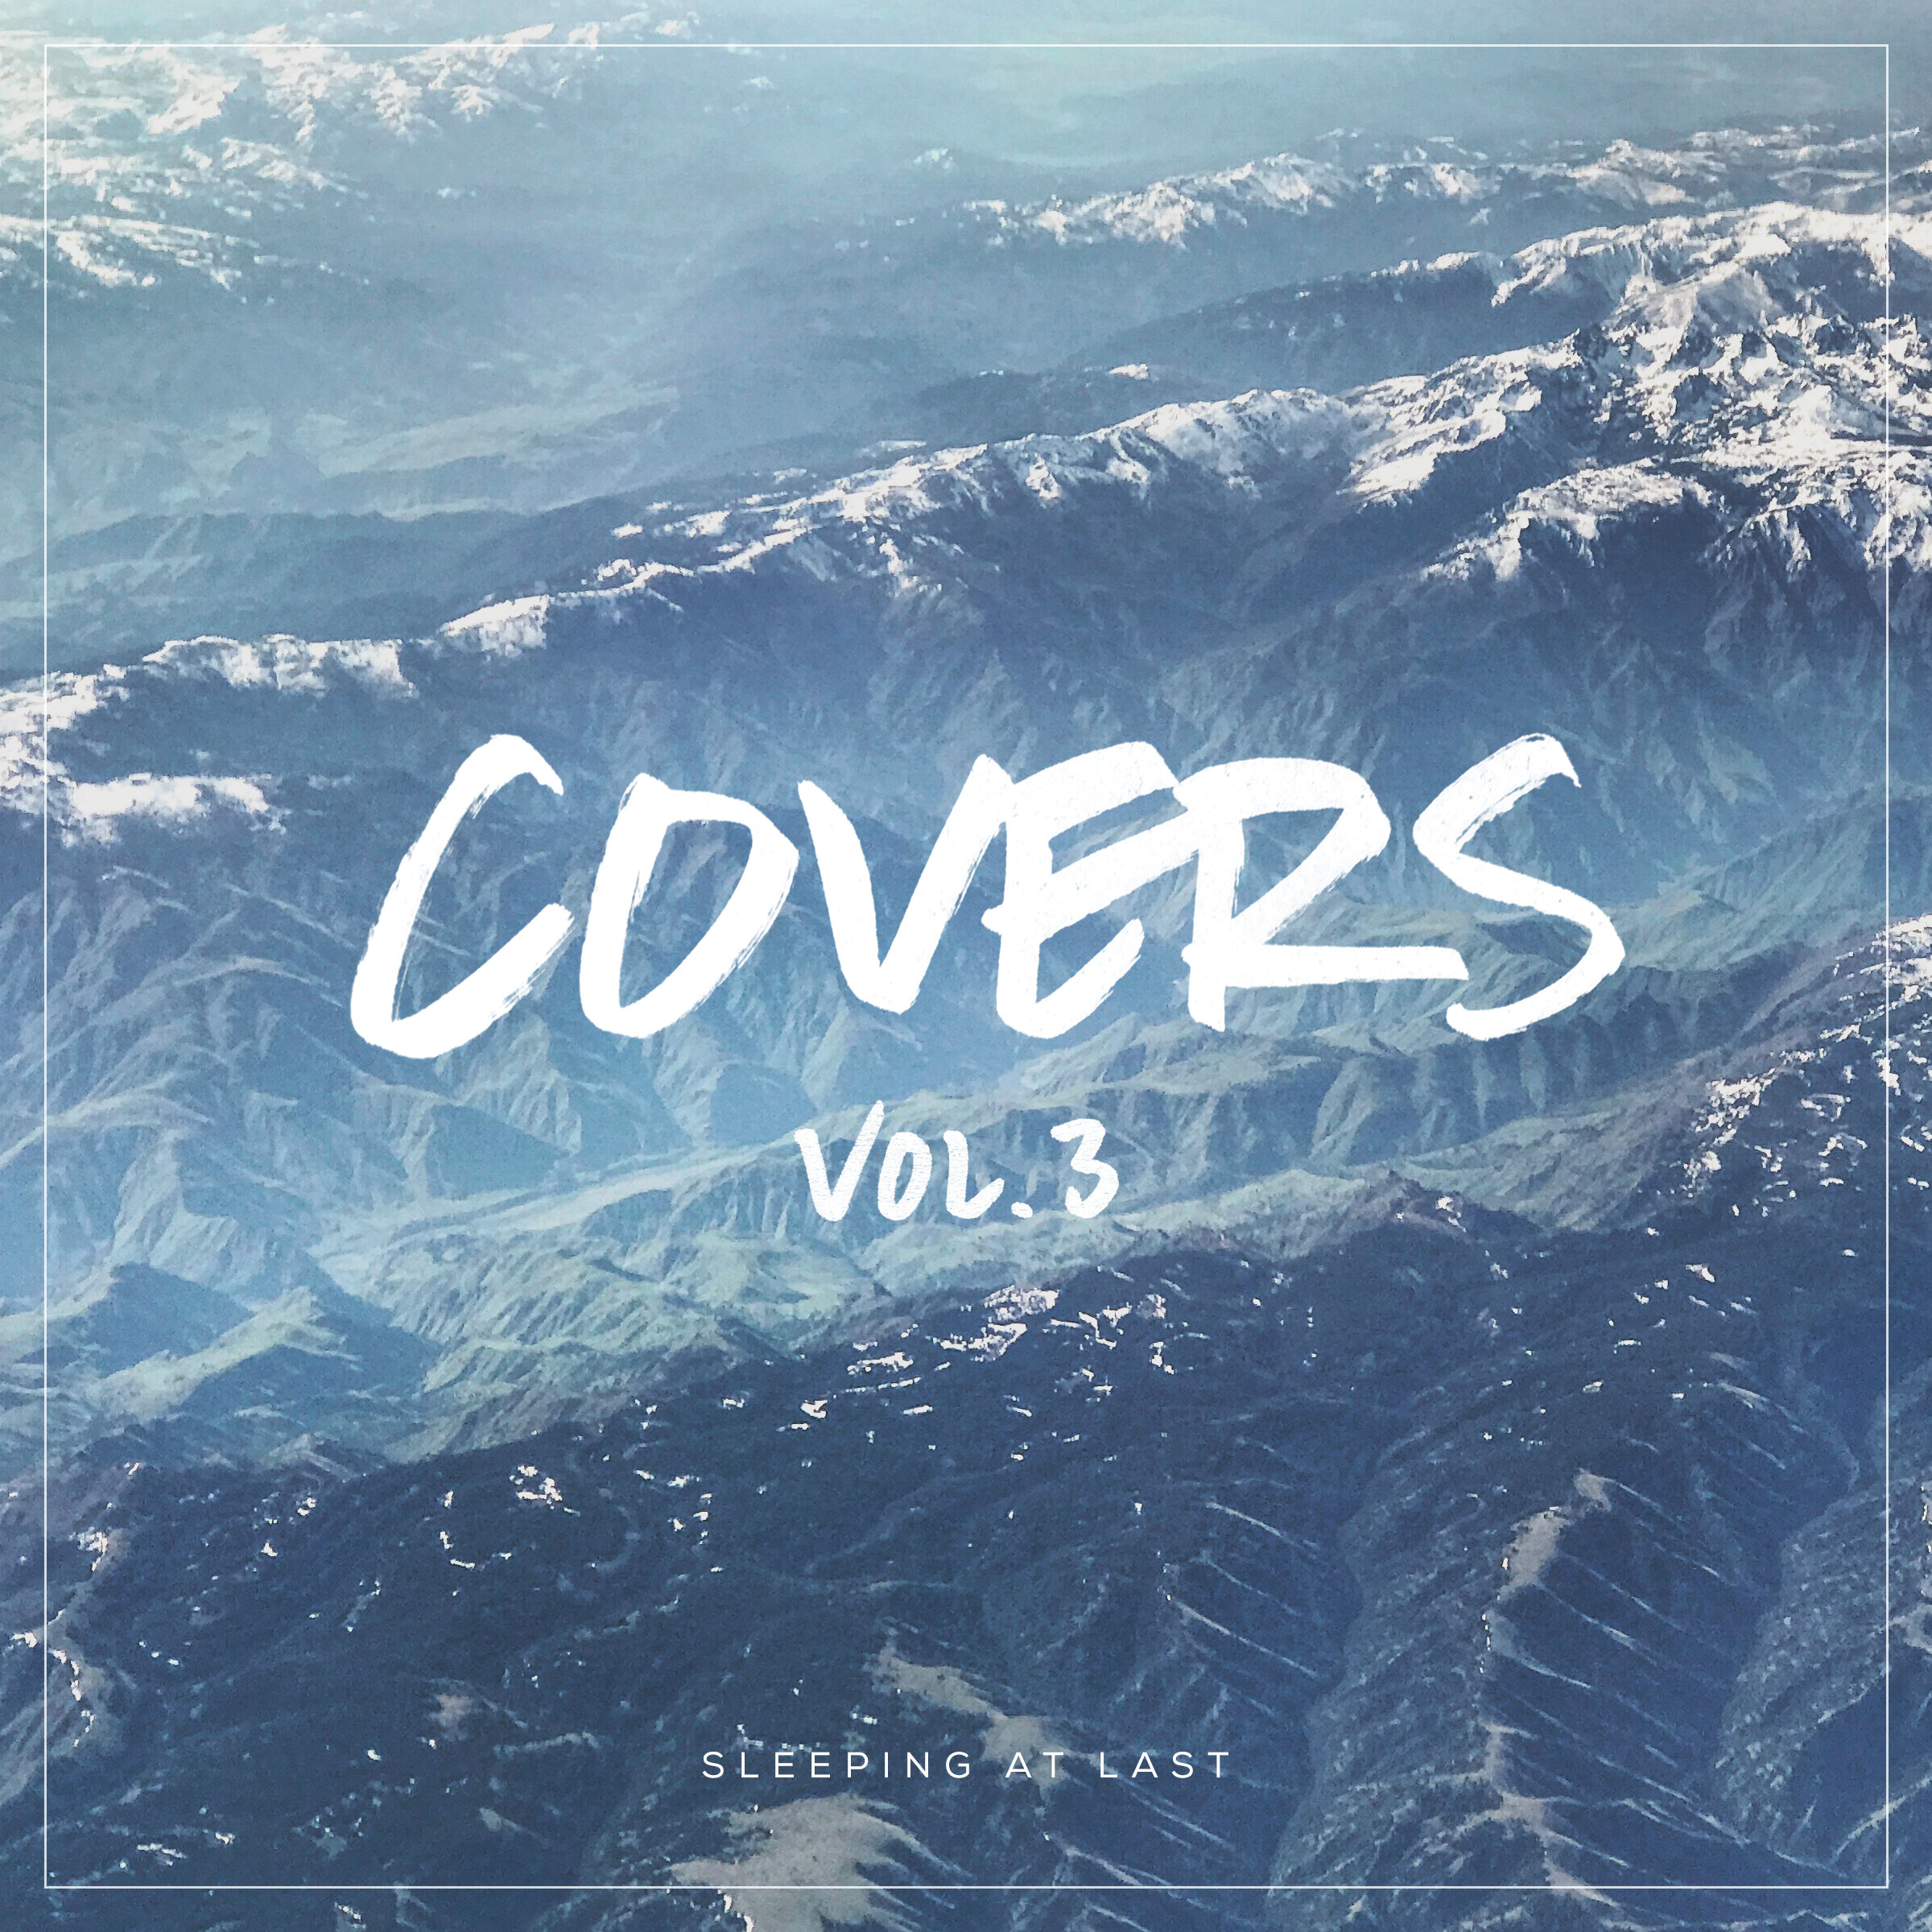 Covers Vol. 3  - Cover - Final.jpg